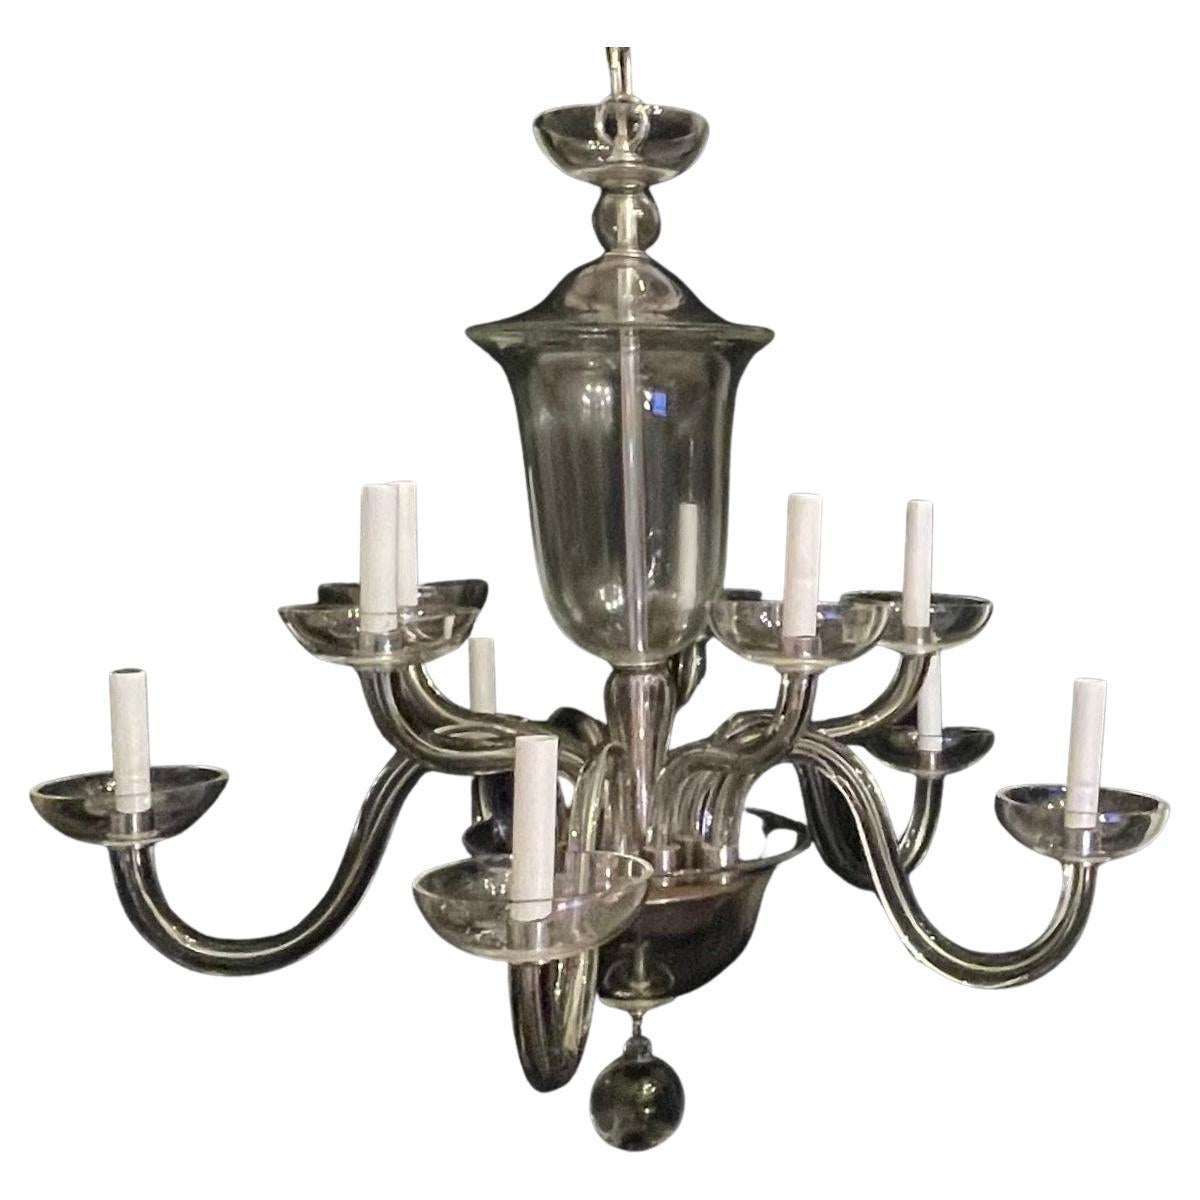 A monumental and elegant crystal / glass Mid-Century Modern nine-light chandelier with scrolls and S Form arms leading to a classic clear bobeches & polished nickel fittings, wiring has been updated and comes ready to install and enjoy.

Measures: